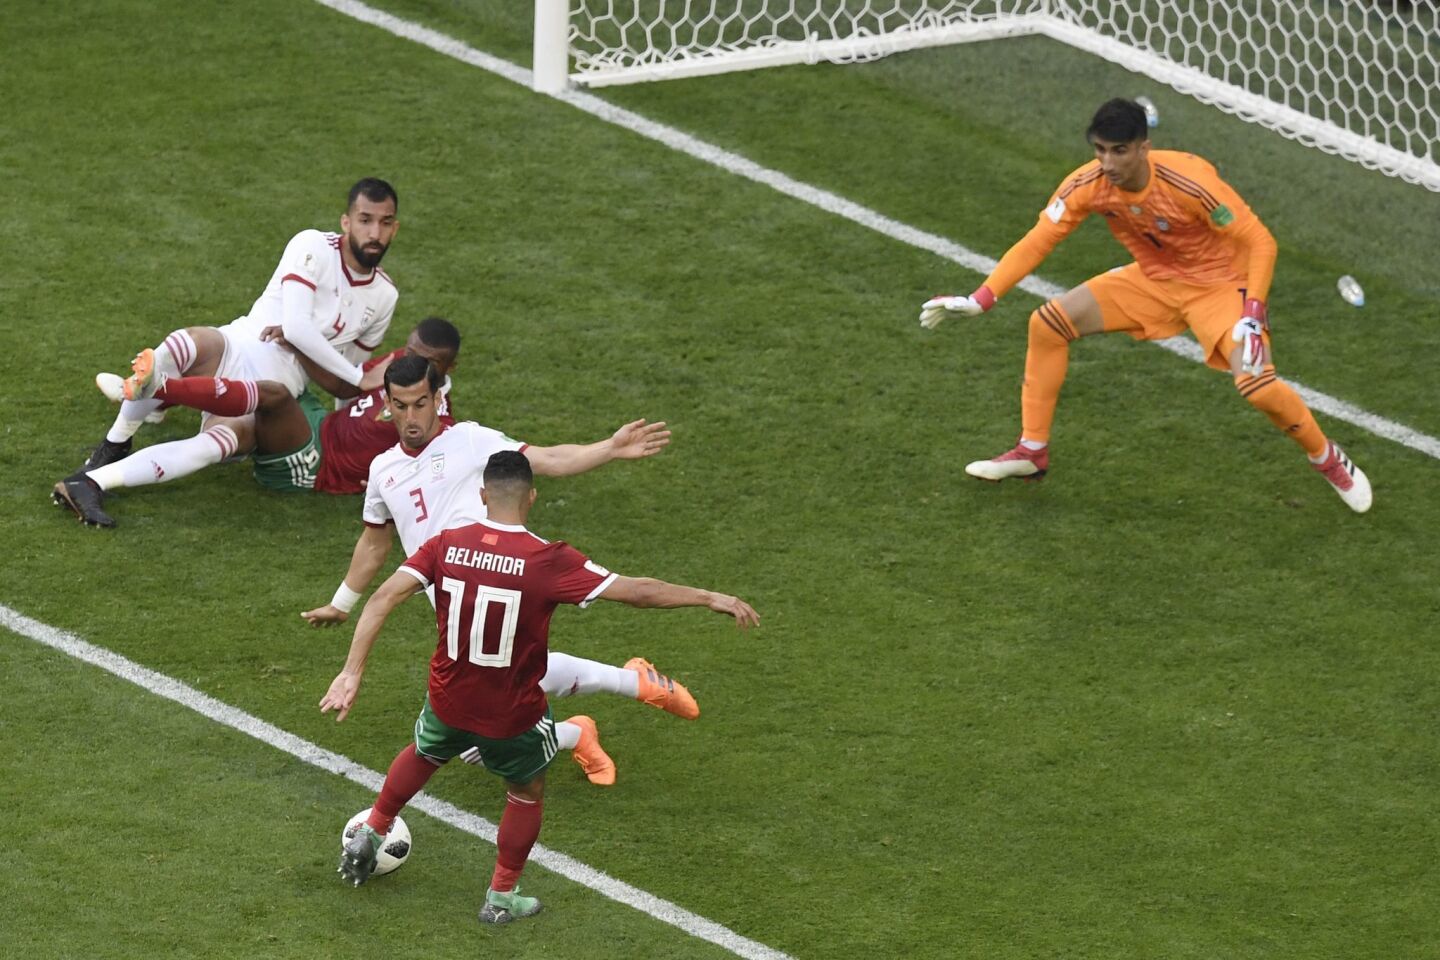 Morocco's midfielder Younes Belhanda (down) attempt to scores a goal during the Russia 2018 World Cup Group B football match between Morocco and Iran at the Saint Petersburg Stadium in Saint Petersburg on June 15, 2018. / AFP PHOTO / GABRIEL BOUYS / RESTRICTED TO EDITORIAL USE - NO MOBILE PUSH ALERTS/DOWNLOADSGABRIEL BOUYS/AFP/Getty Images ** OUTS - ELSENT, FPG, CM - OUTS * NM, PH, VA if sourced by CT, LA or MoD **